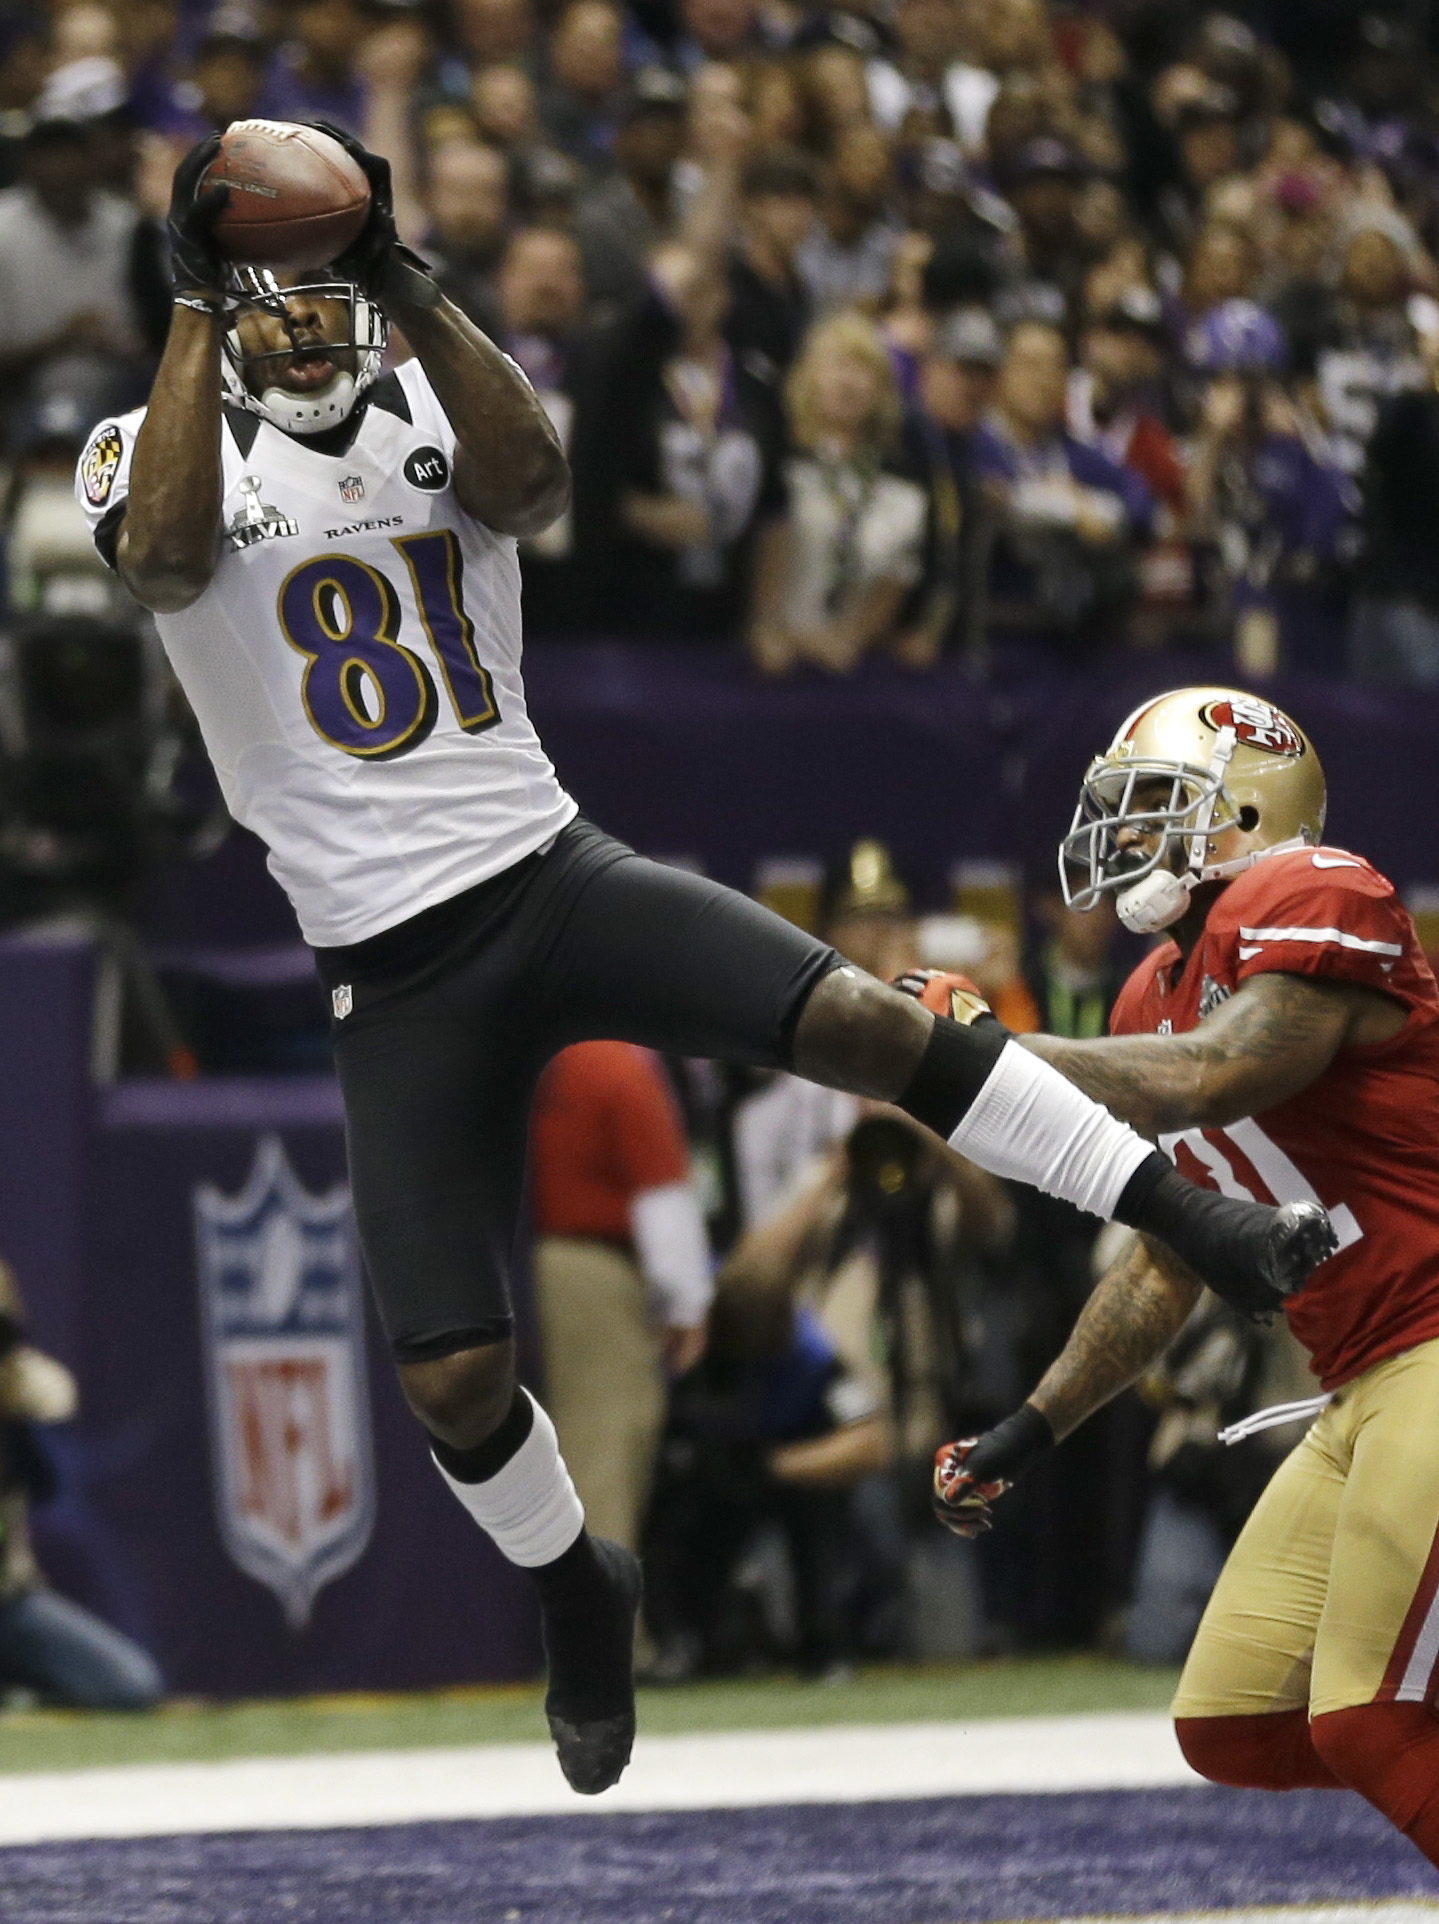 Ravens beat 49ers for Super Bowl title - The Columbian